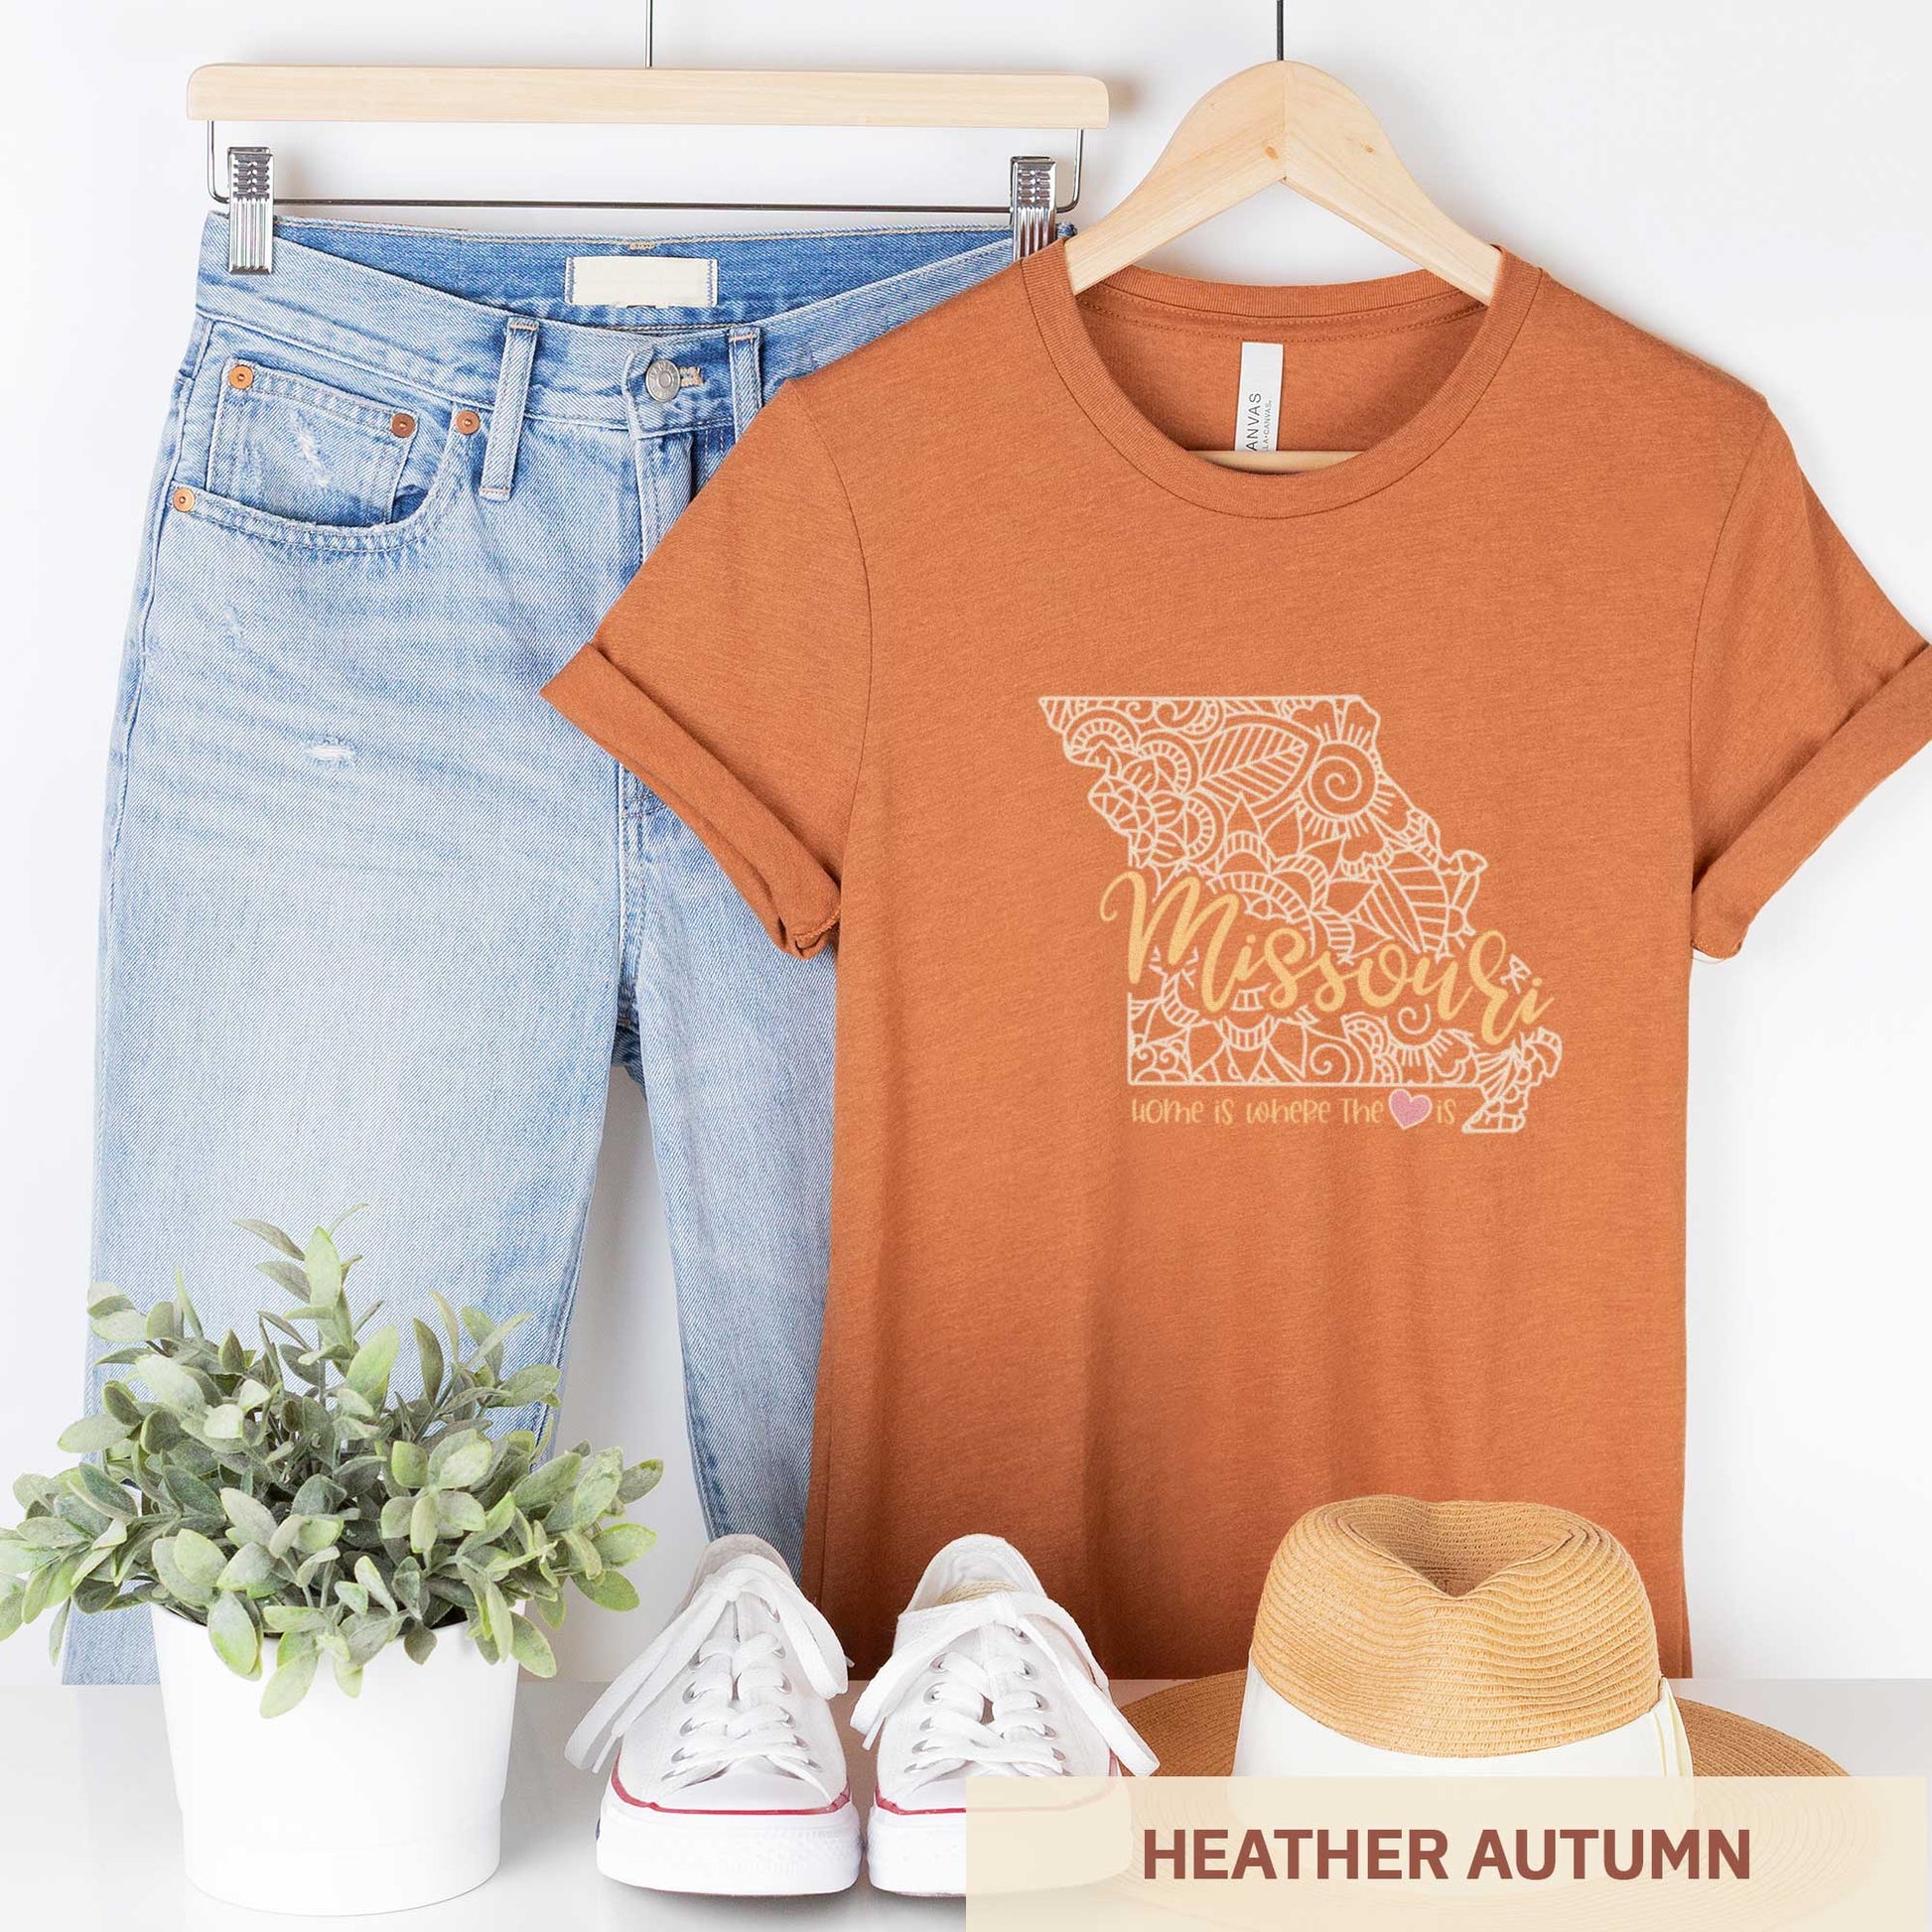 A hanging heather autumn Bella Canvas t-shirt featuring a mandala in the shape of Missouri with the words home is where the heart is.